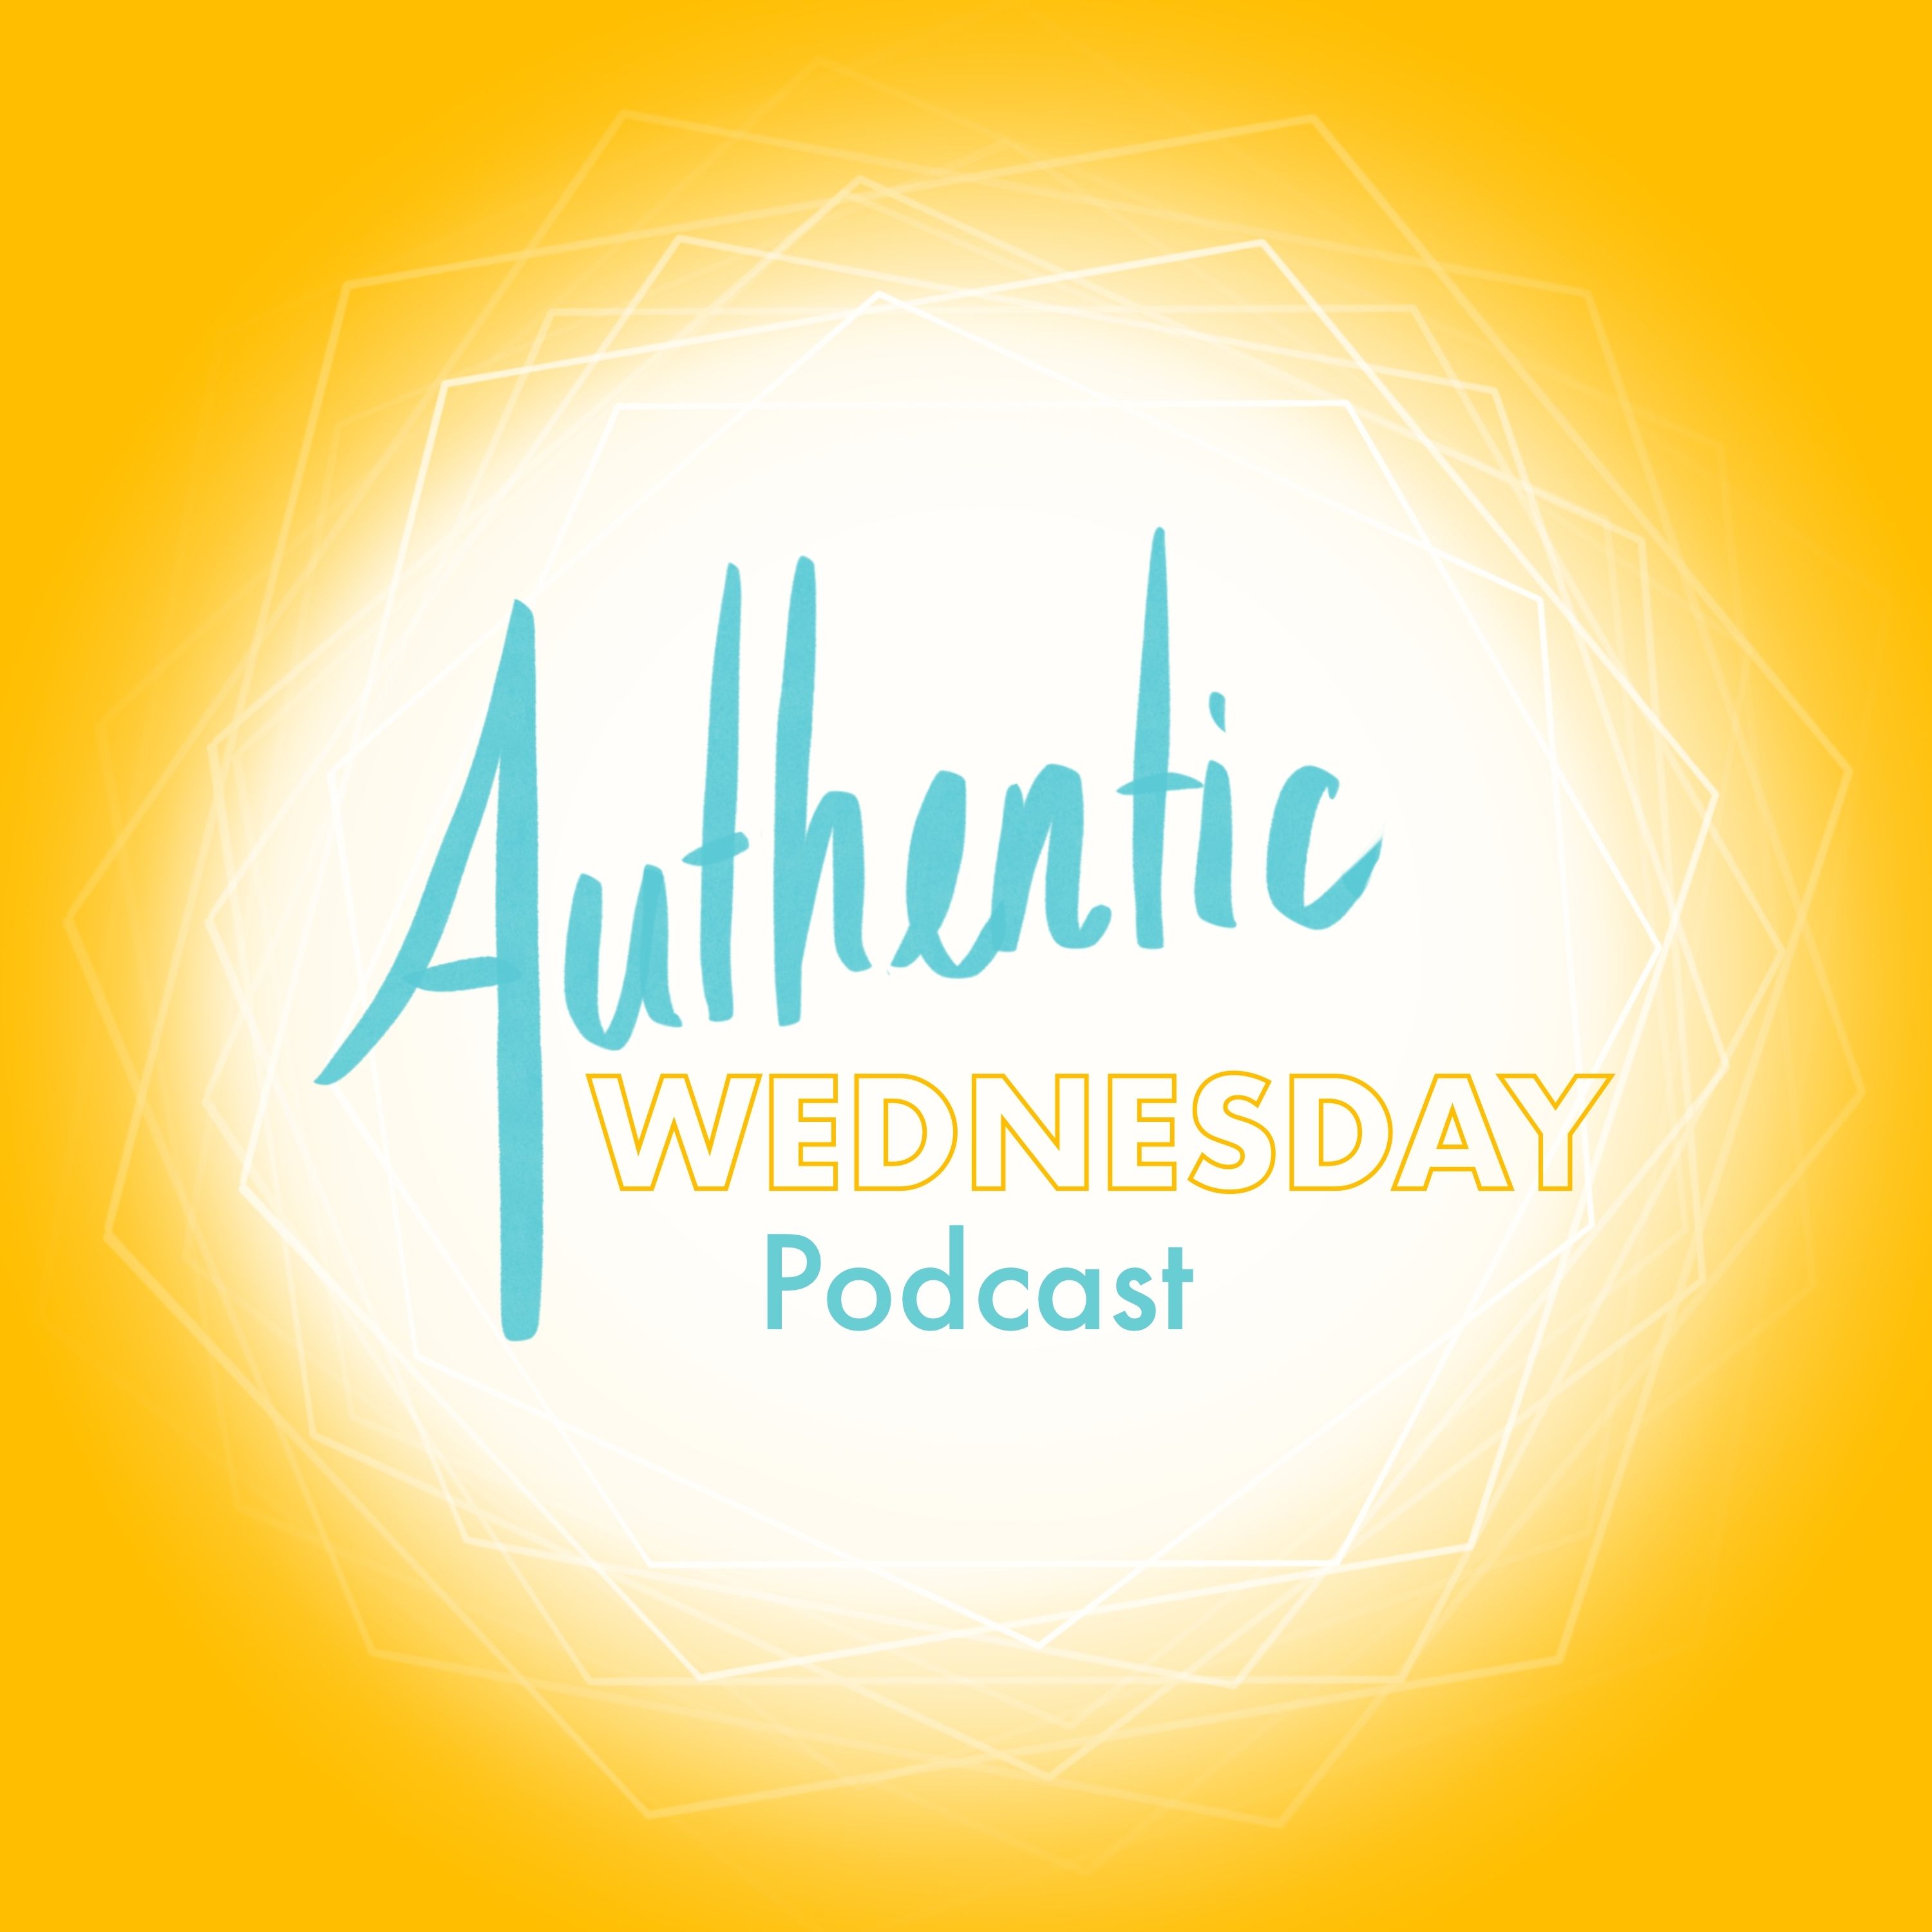 Show artwork for Authentic Wednesday Podcast